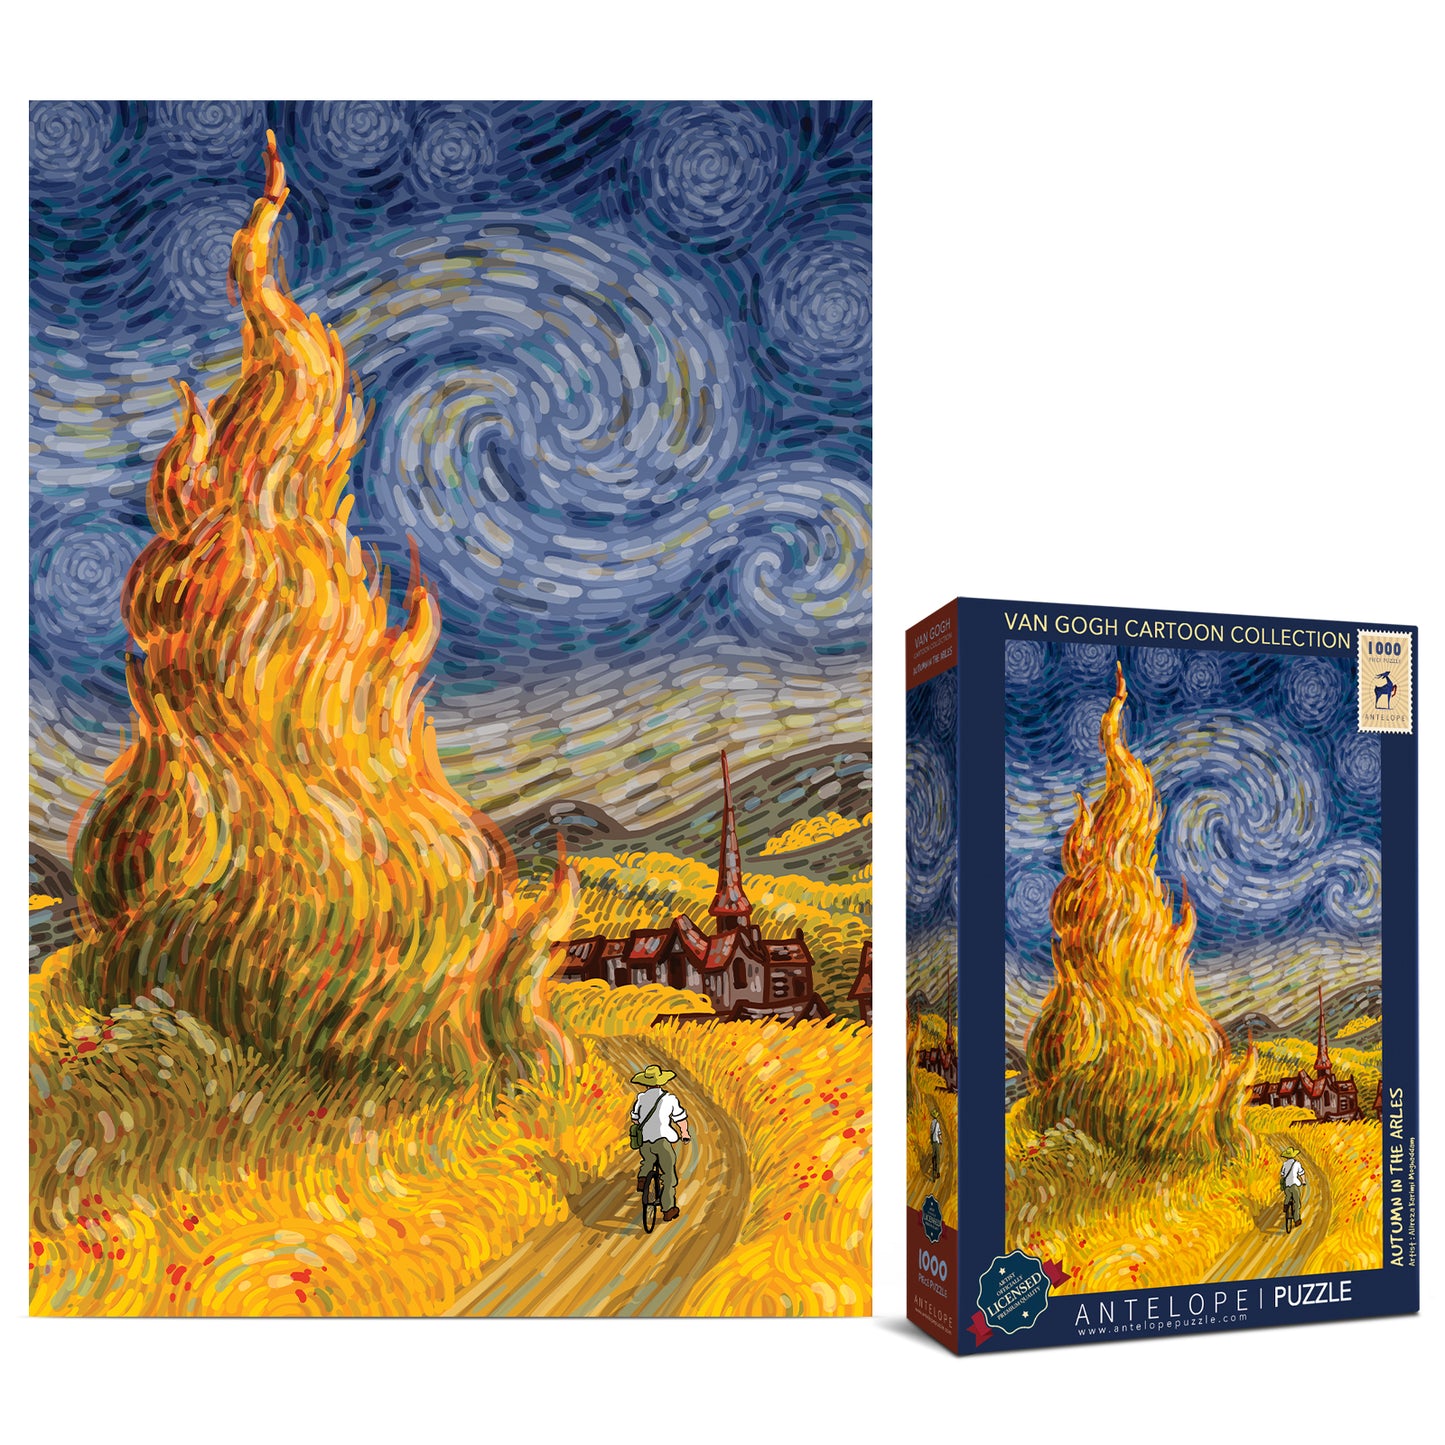 Autumn in Arles 1000 Piece Jigsaw Puzzle